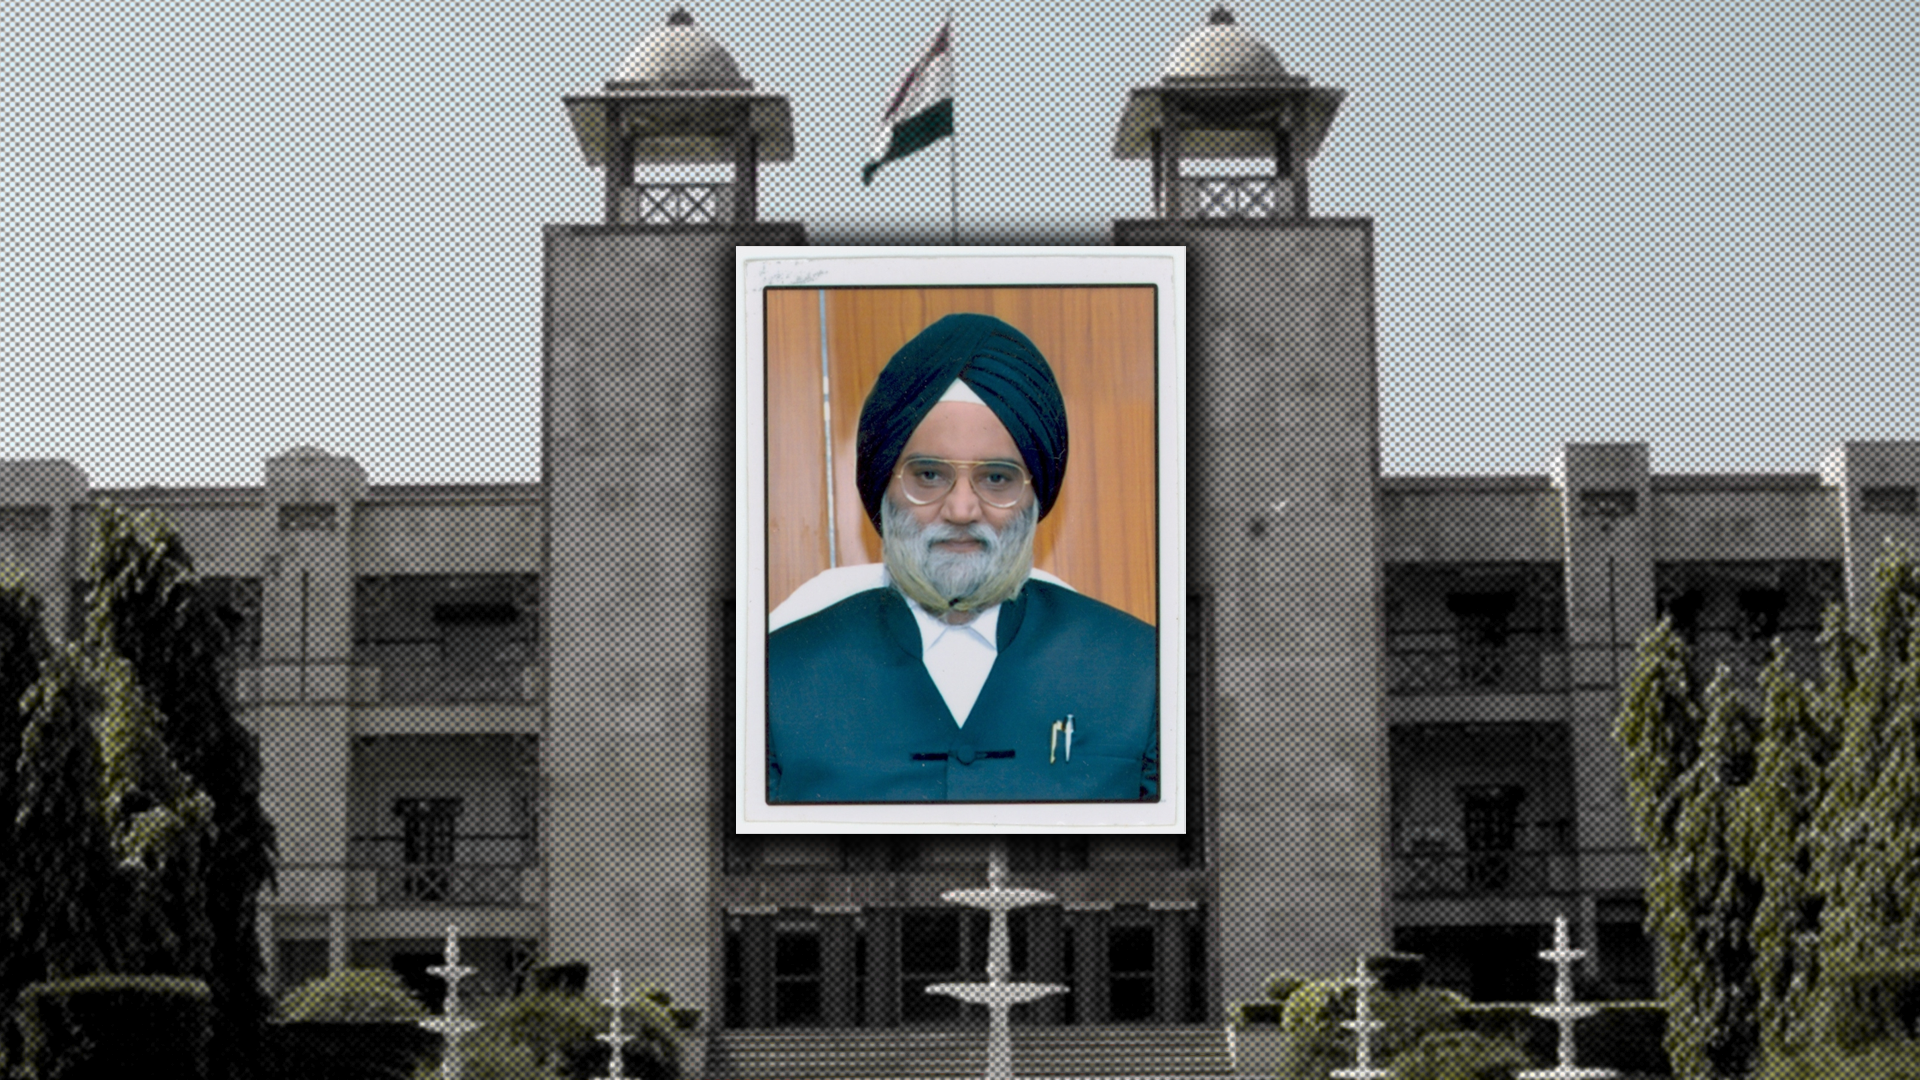 May-3-Unnatural-Sex-By-A-Man-With-Wife-Not-Rape_-Absence-Of-Womans-Consent-Immaterial-Court-in-India-Justice-Gurpal-Singh-Ahluwalia-2.png